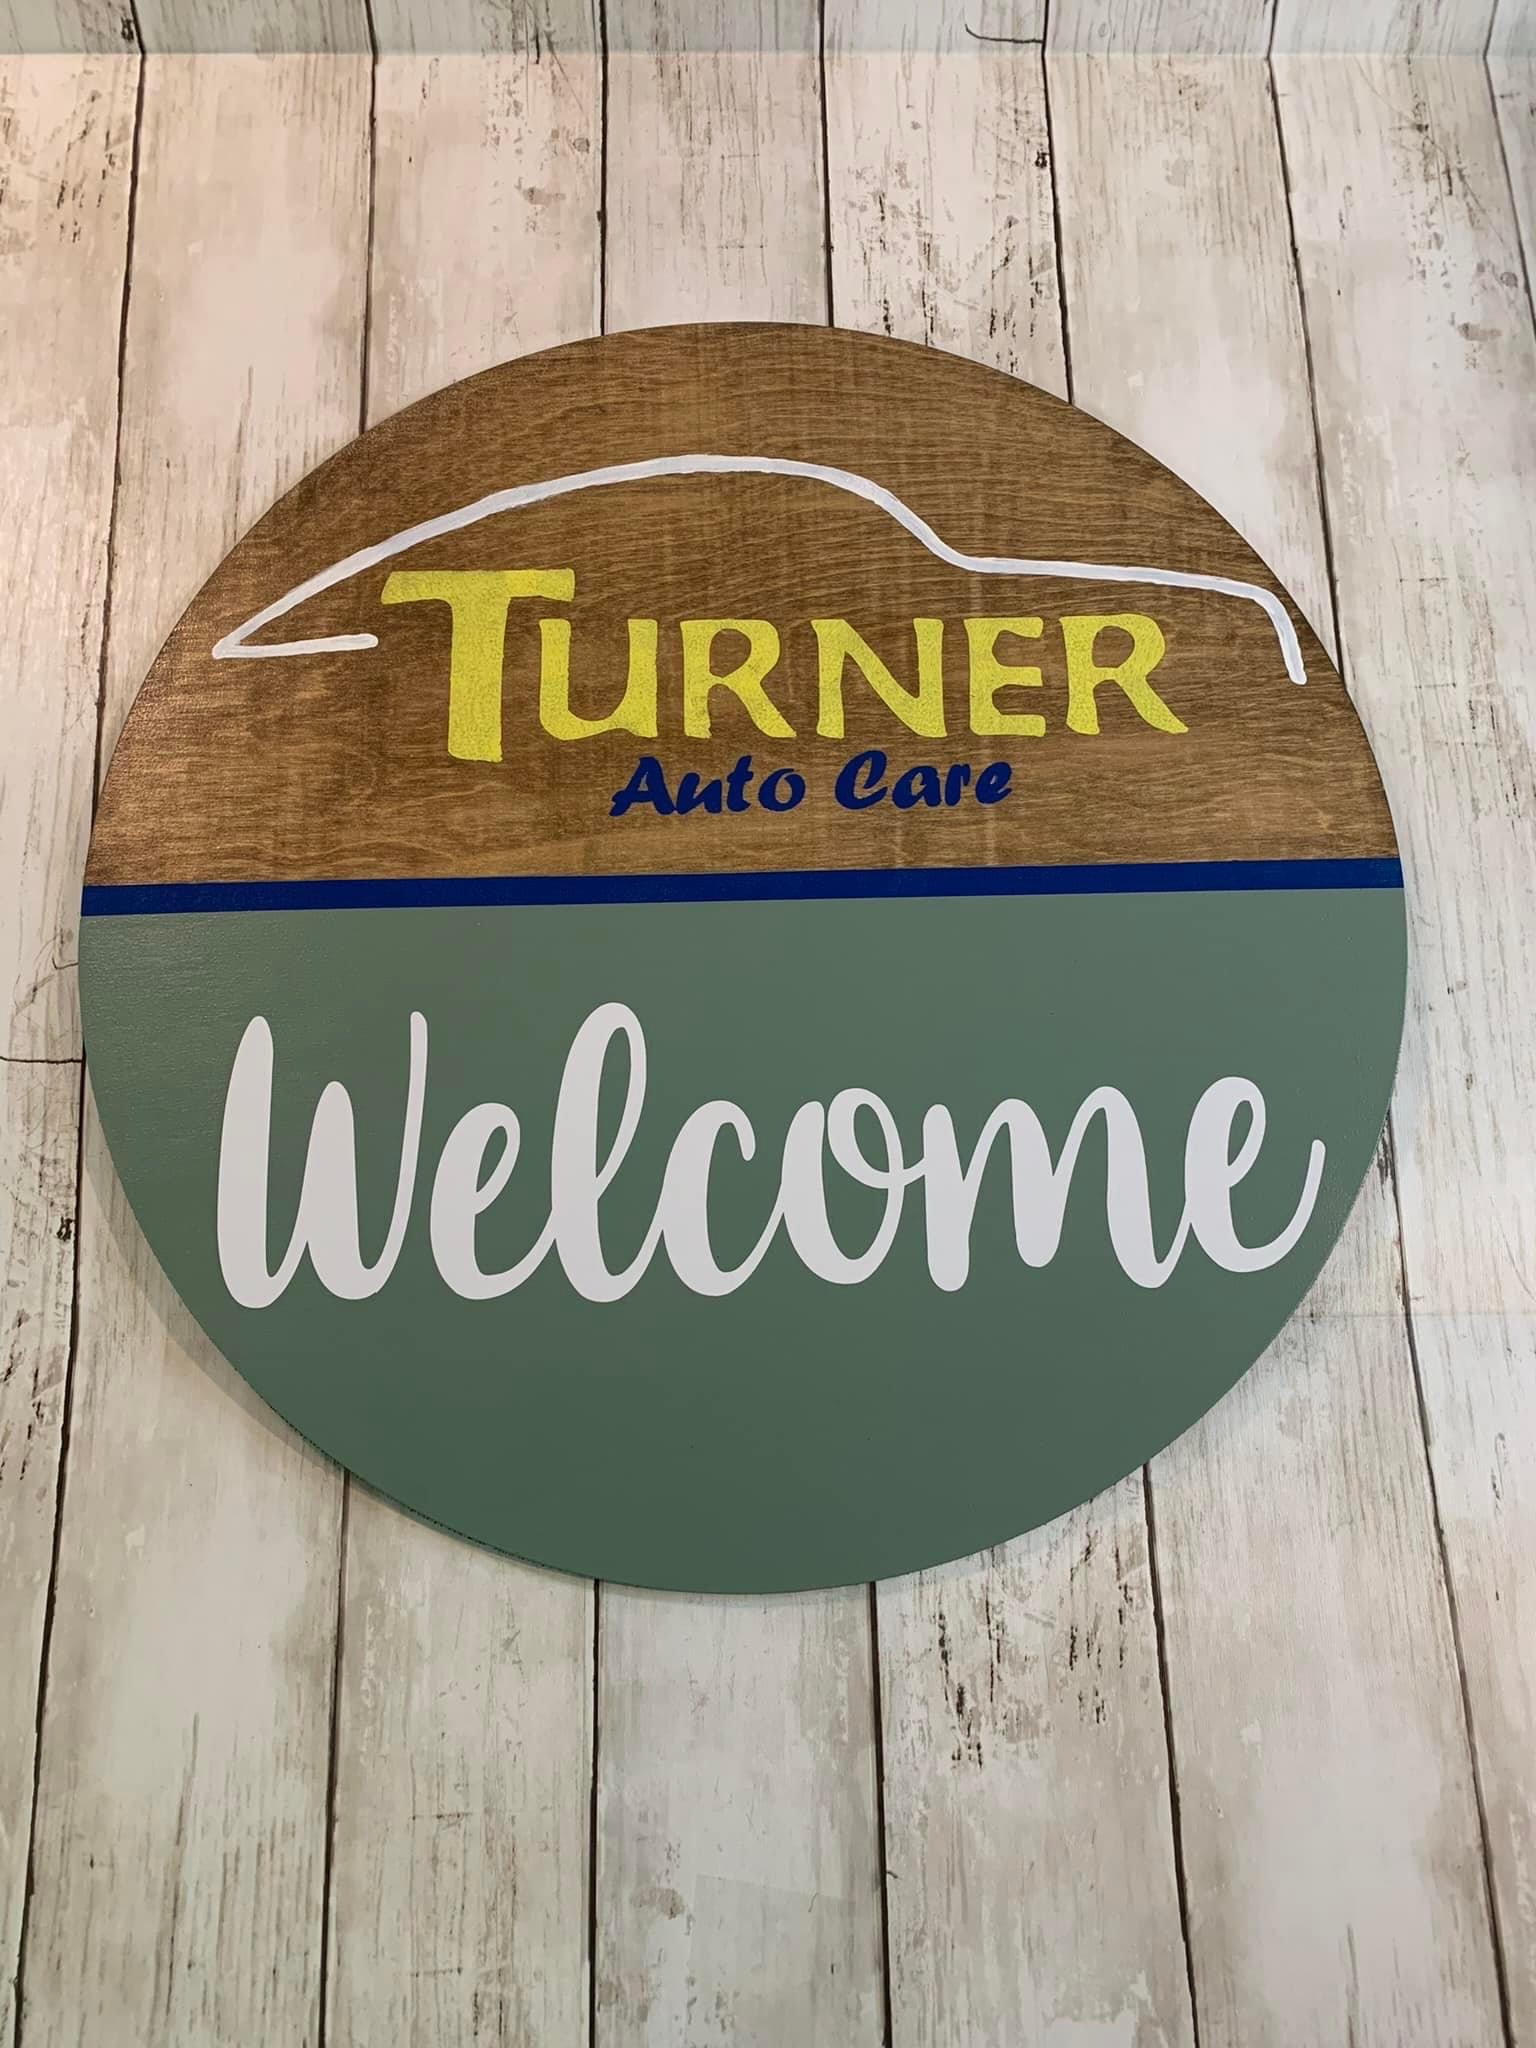 May be an image of text that says 'TURNER Welcome'